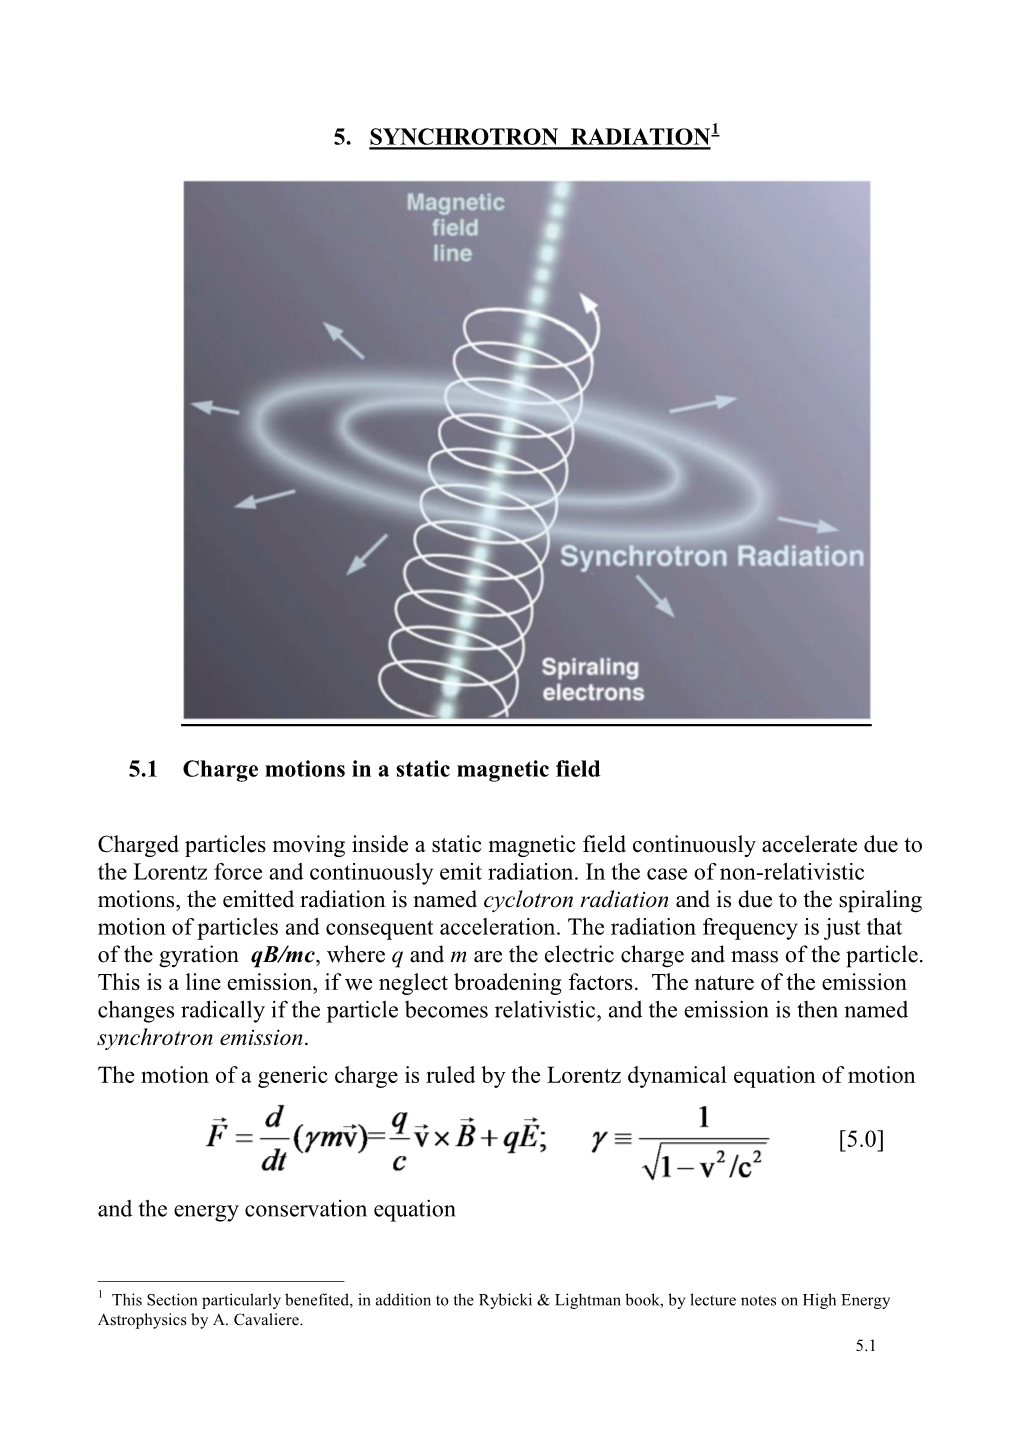 5. SYNCHROTRON RADIATION 5.1 Charge Motions in a Static Magnetic